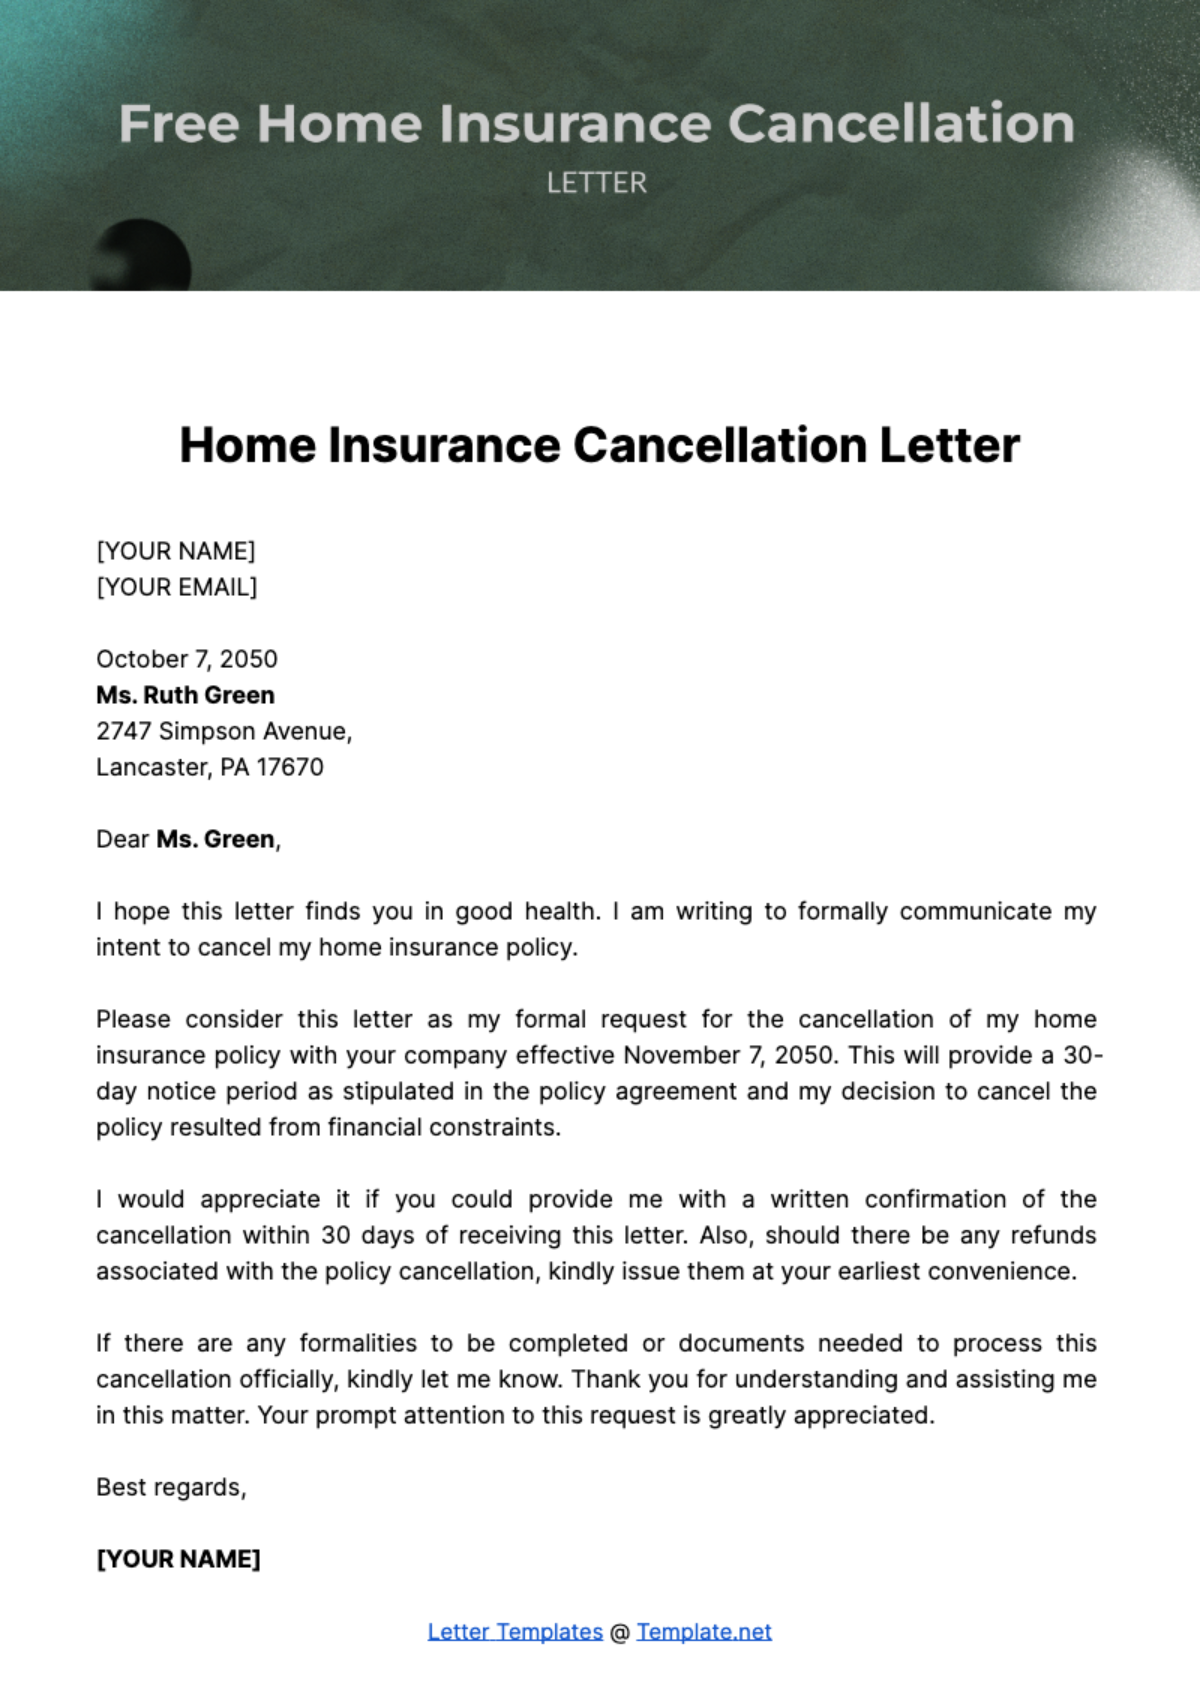 Free Home Insurance Cancellation Letter Template